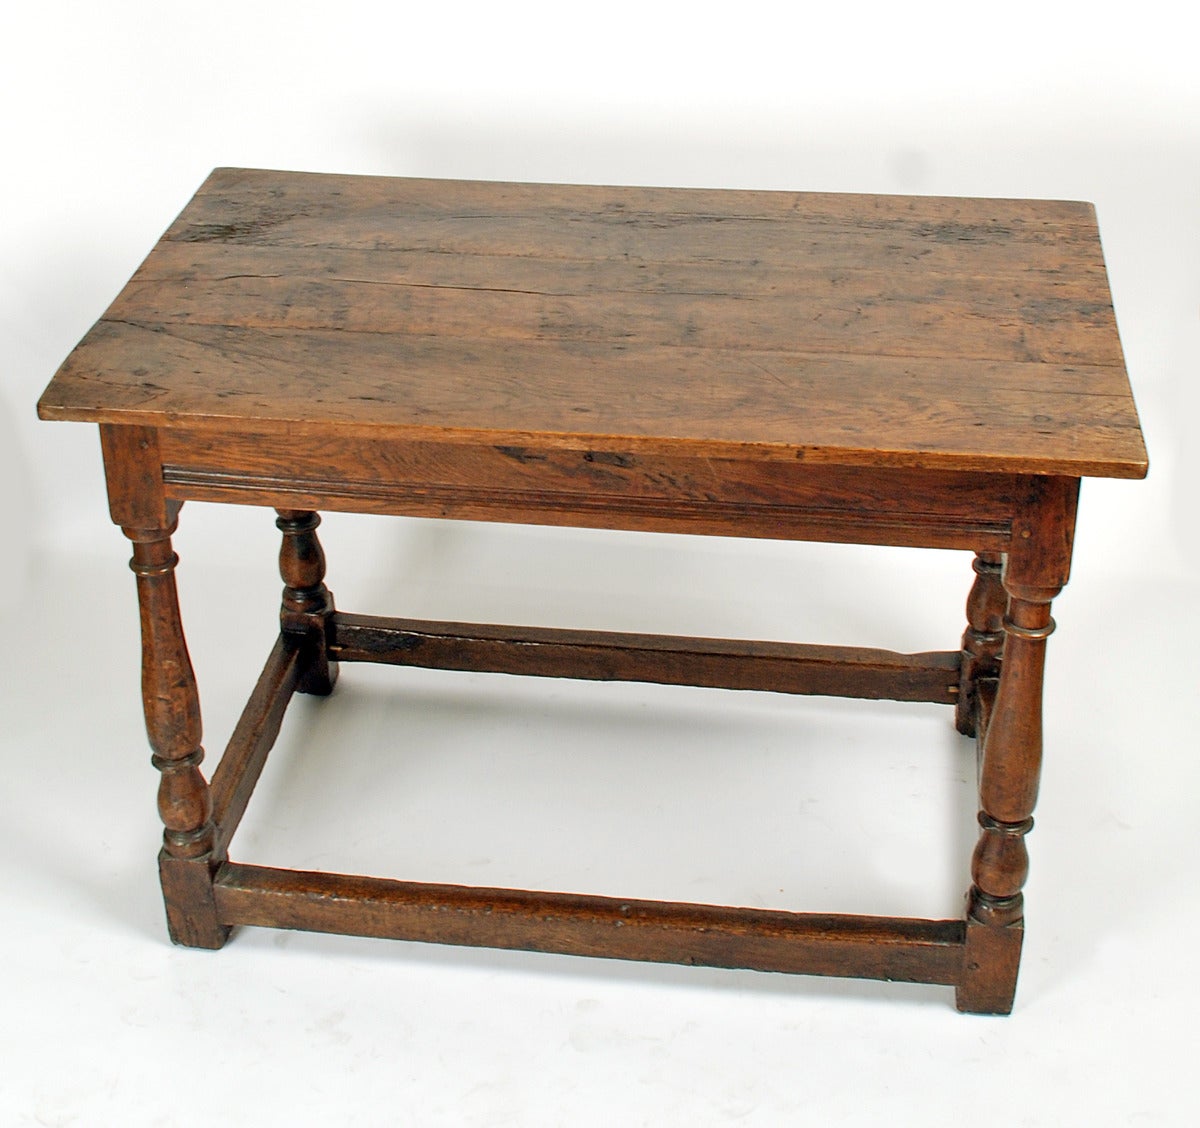 A handsome early 18th century William and Mary period tavern table with turned legs connected by a stretcher base. Beautiful color with lustrous surface patina. Circa 1700 - 1725.

Please note: the talavera pottery is shown for scale only and is